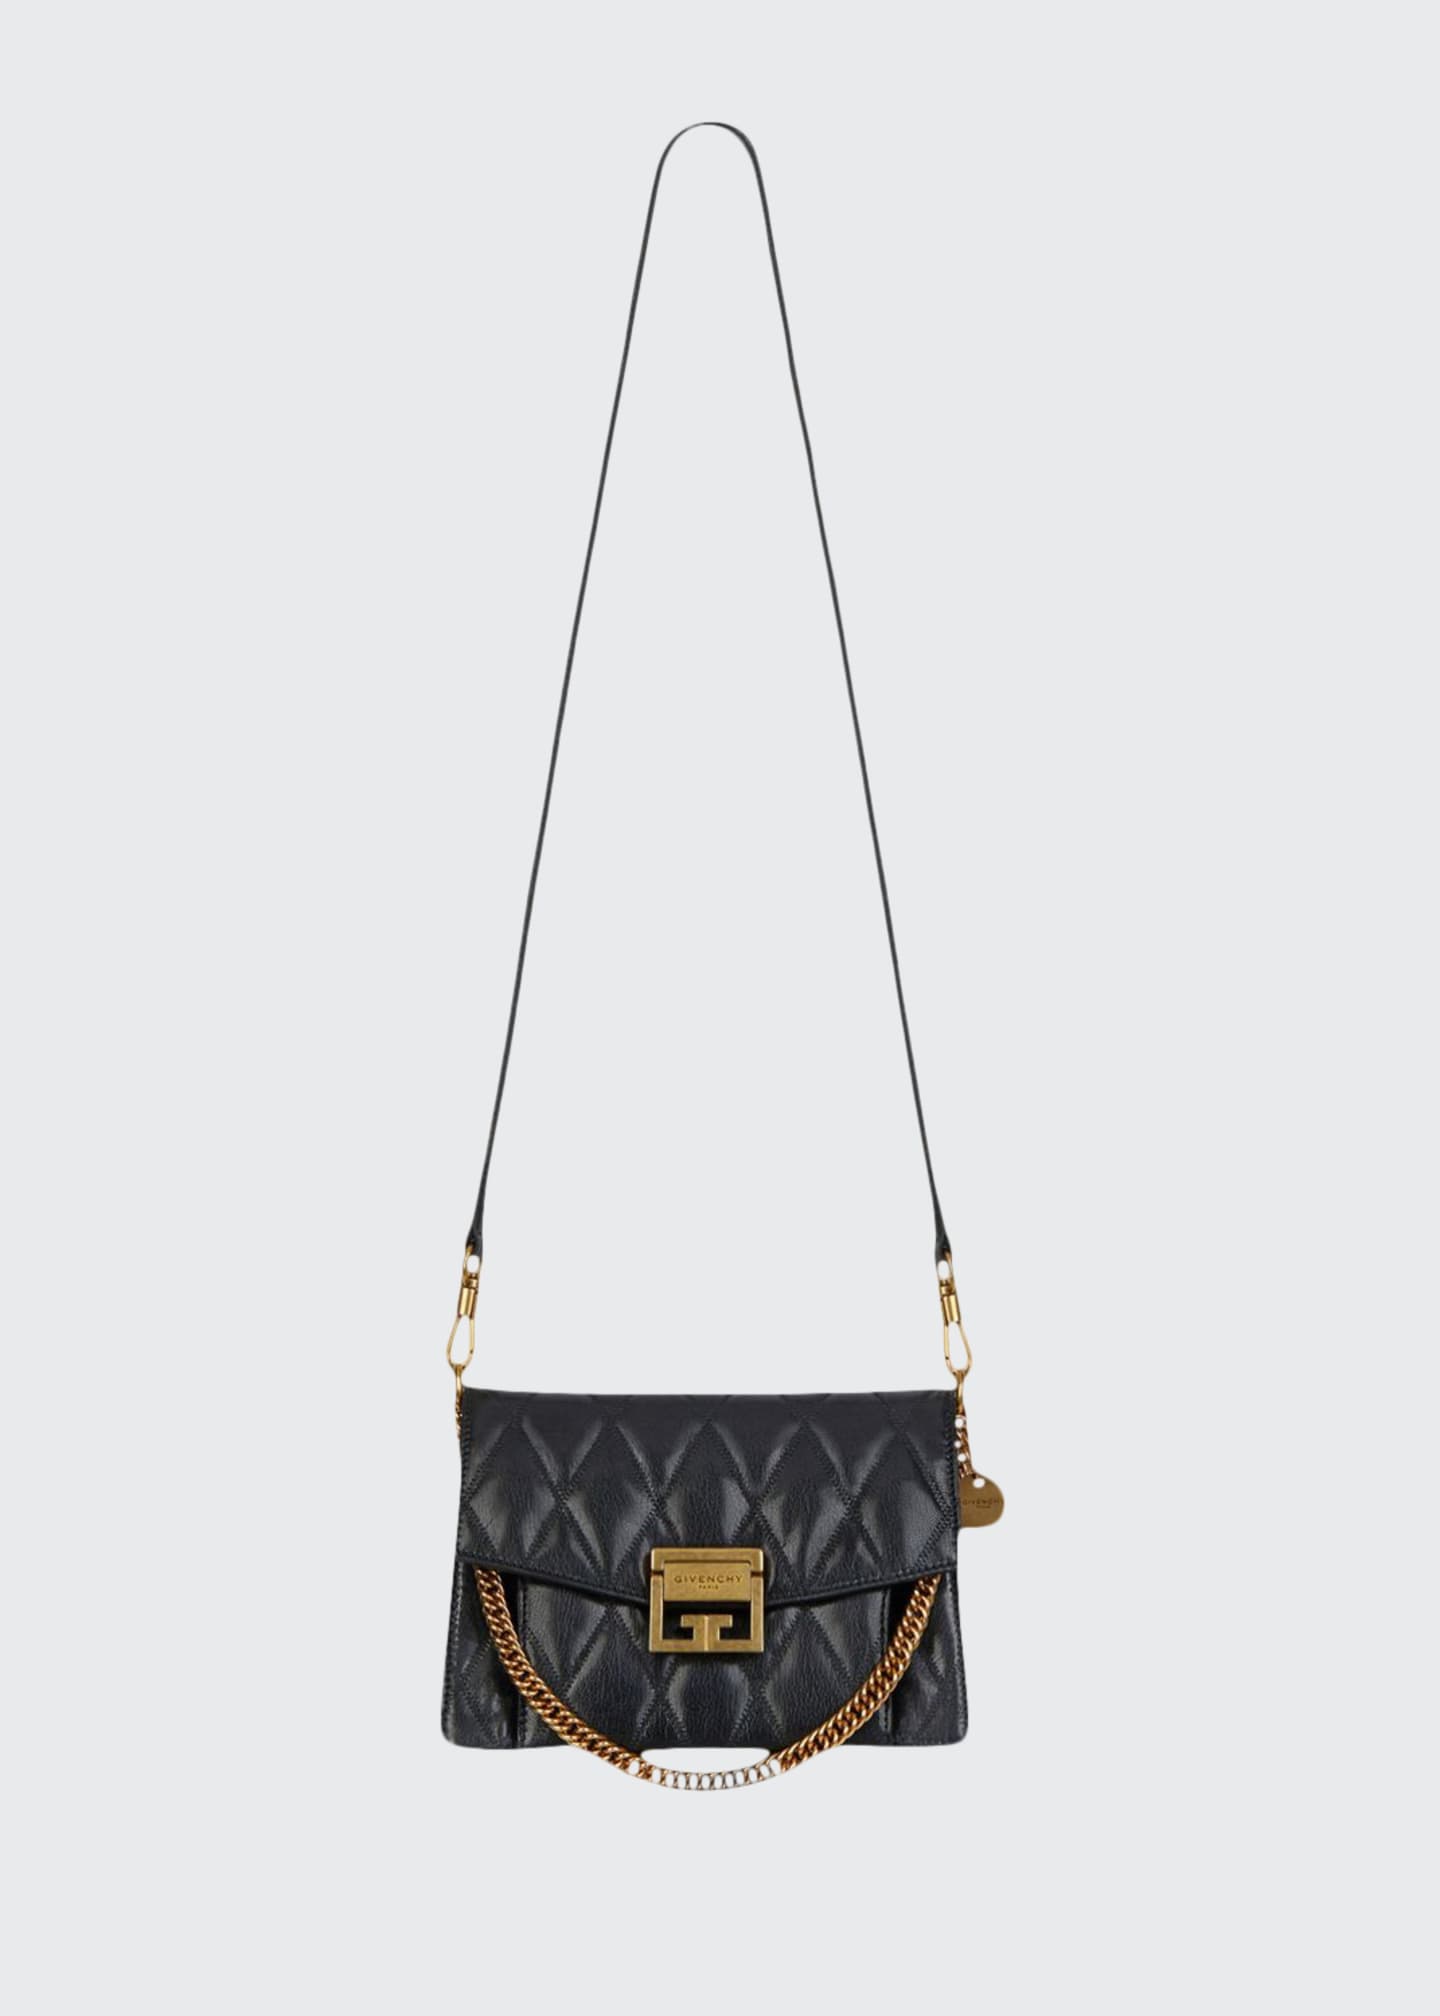 Givenchy GV3 Small Quilted Crossbody Bag - Bergdorf Goodman